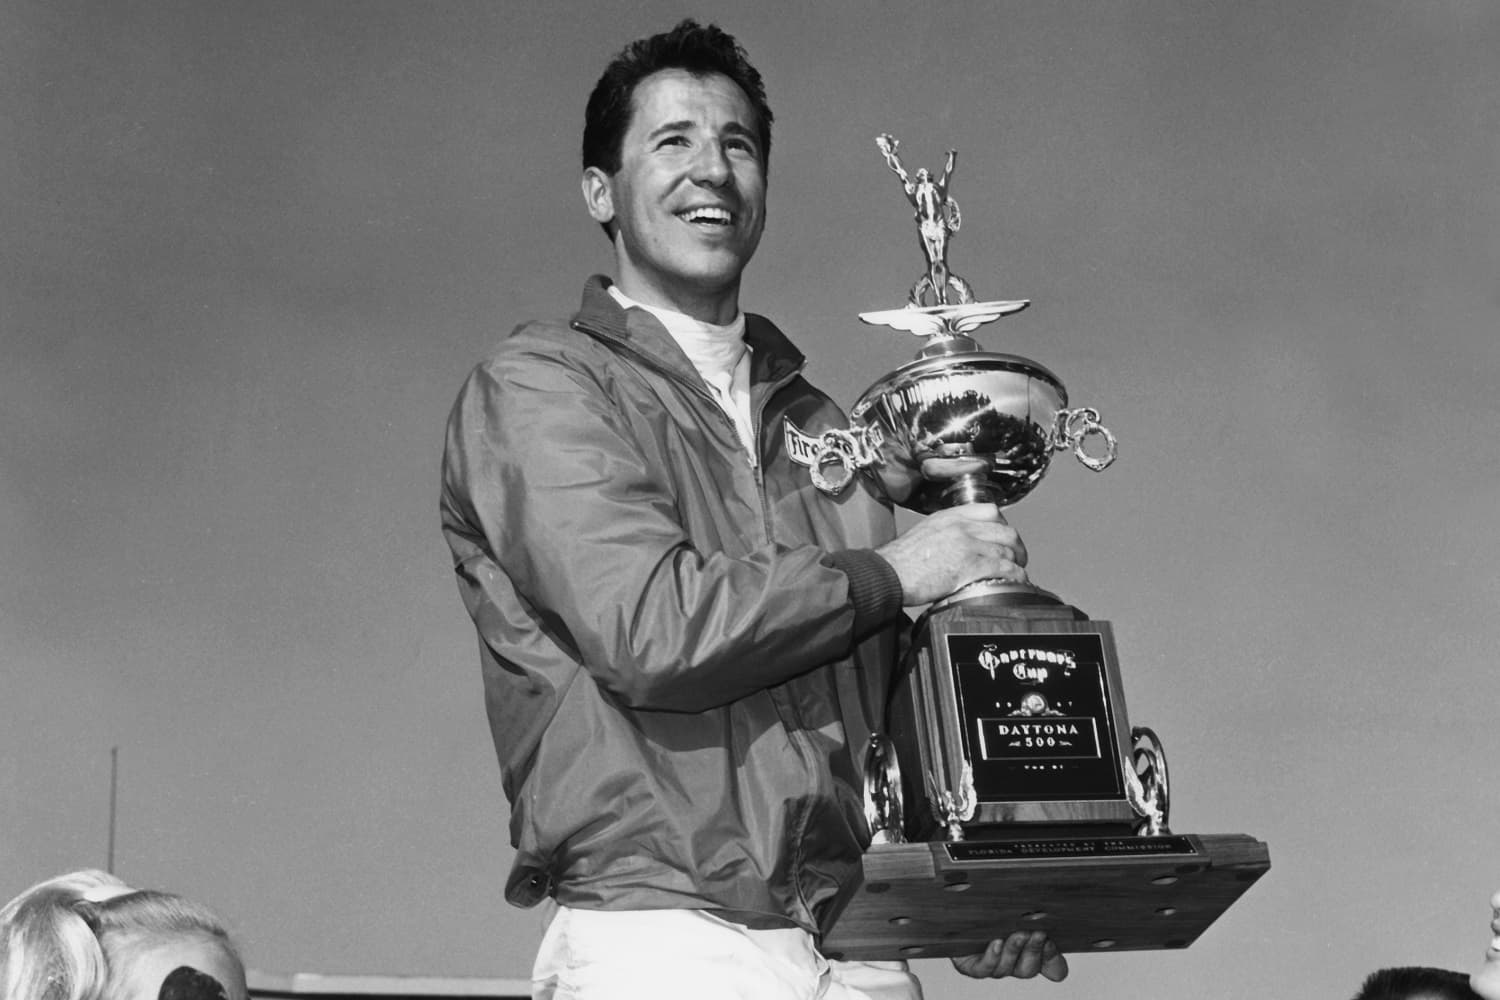 Mario Andretti stands in Victory Lane after winning the Daytona 500 on Feb. 26, 1967. | ISC Archives/CQ-Roll Call Group via Getty Images